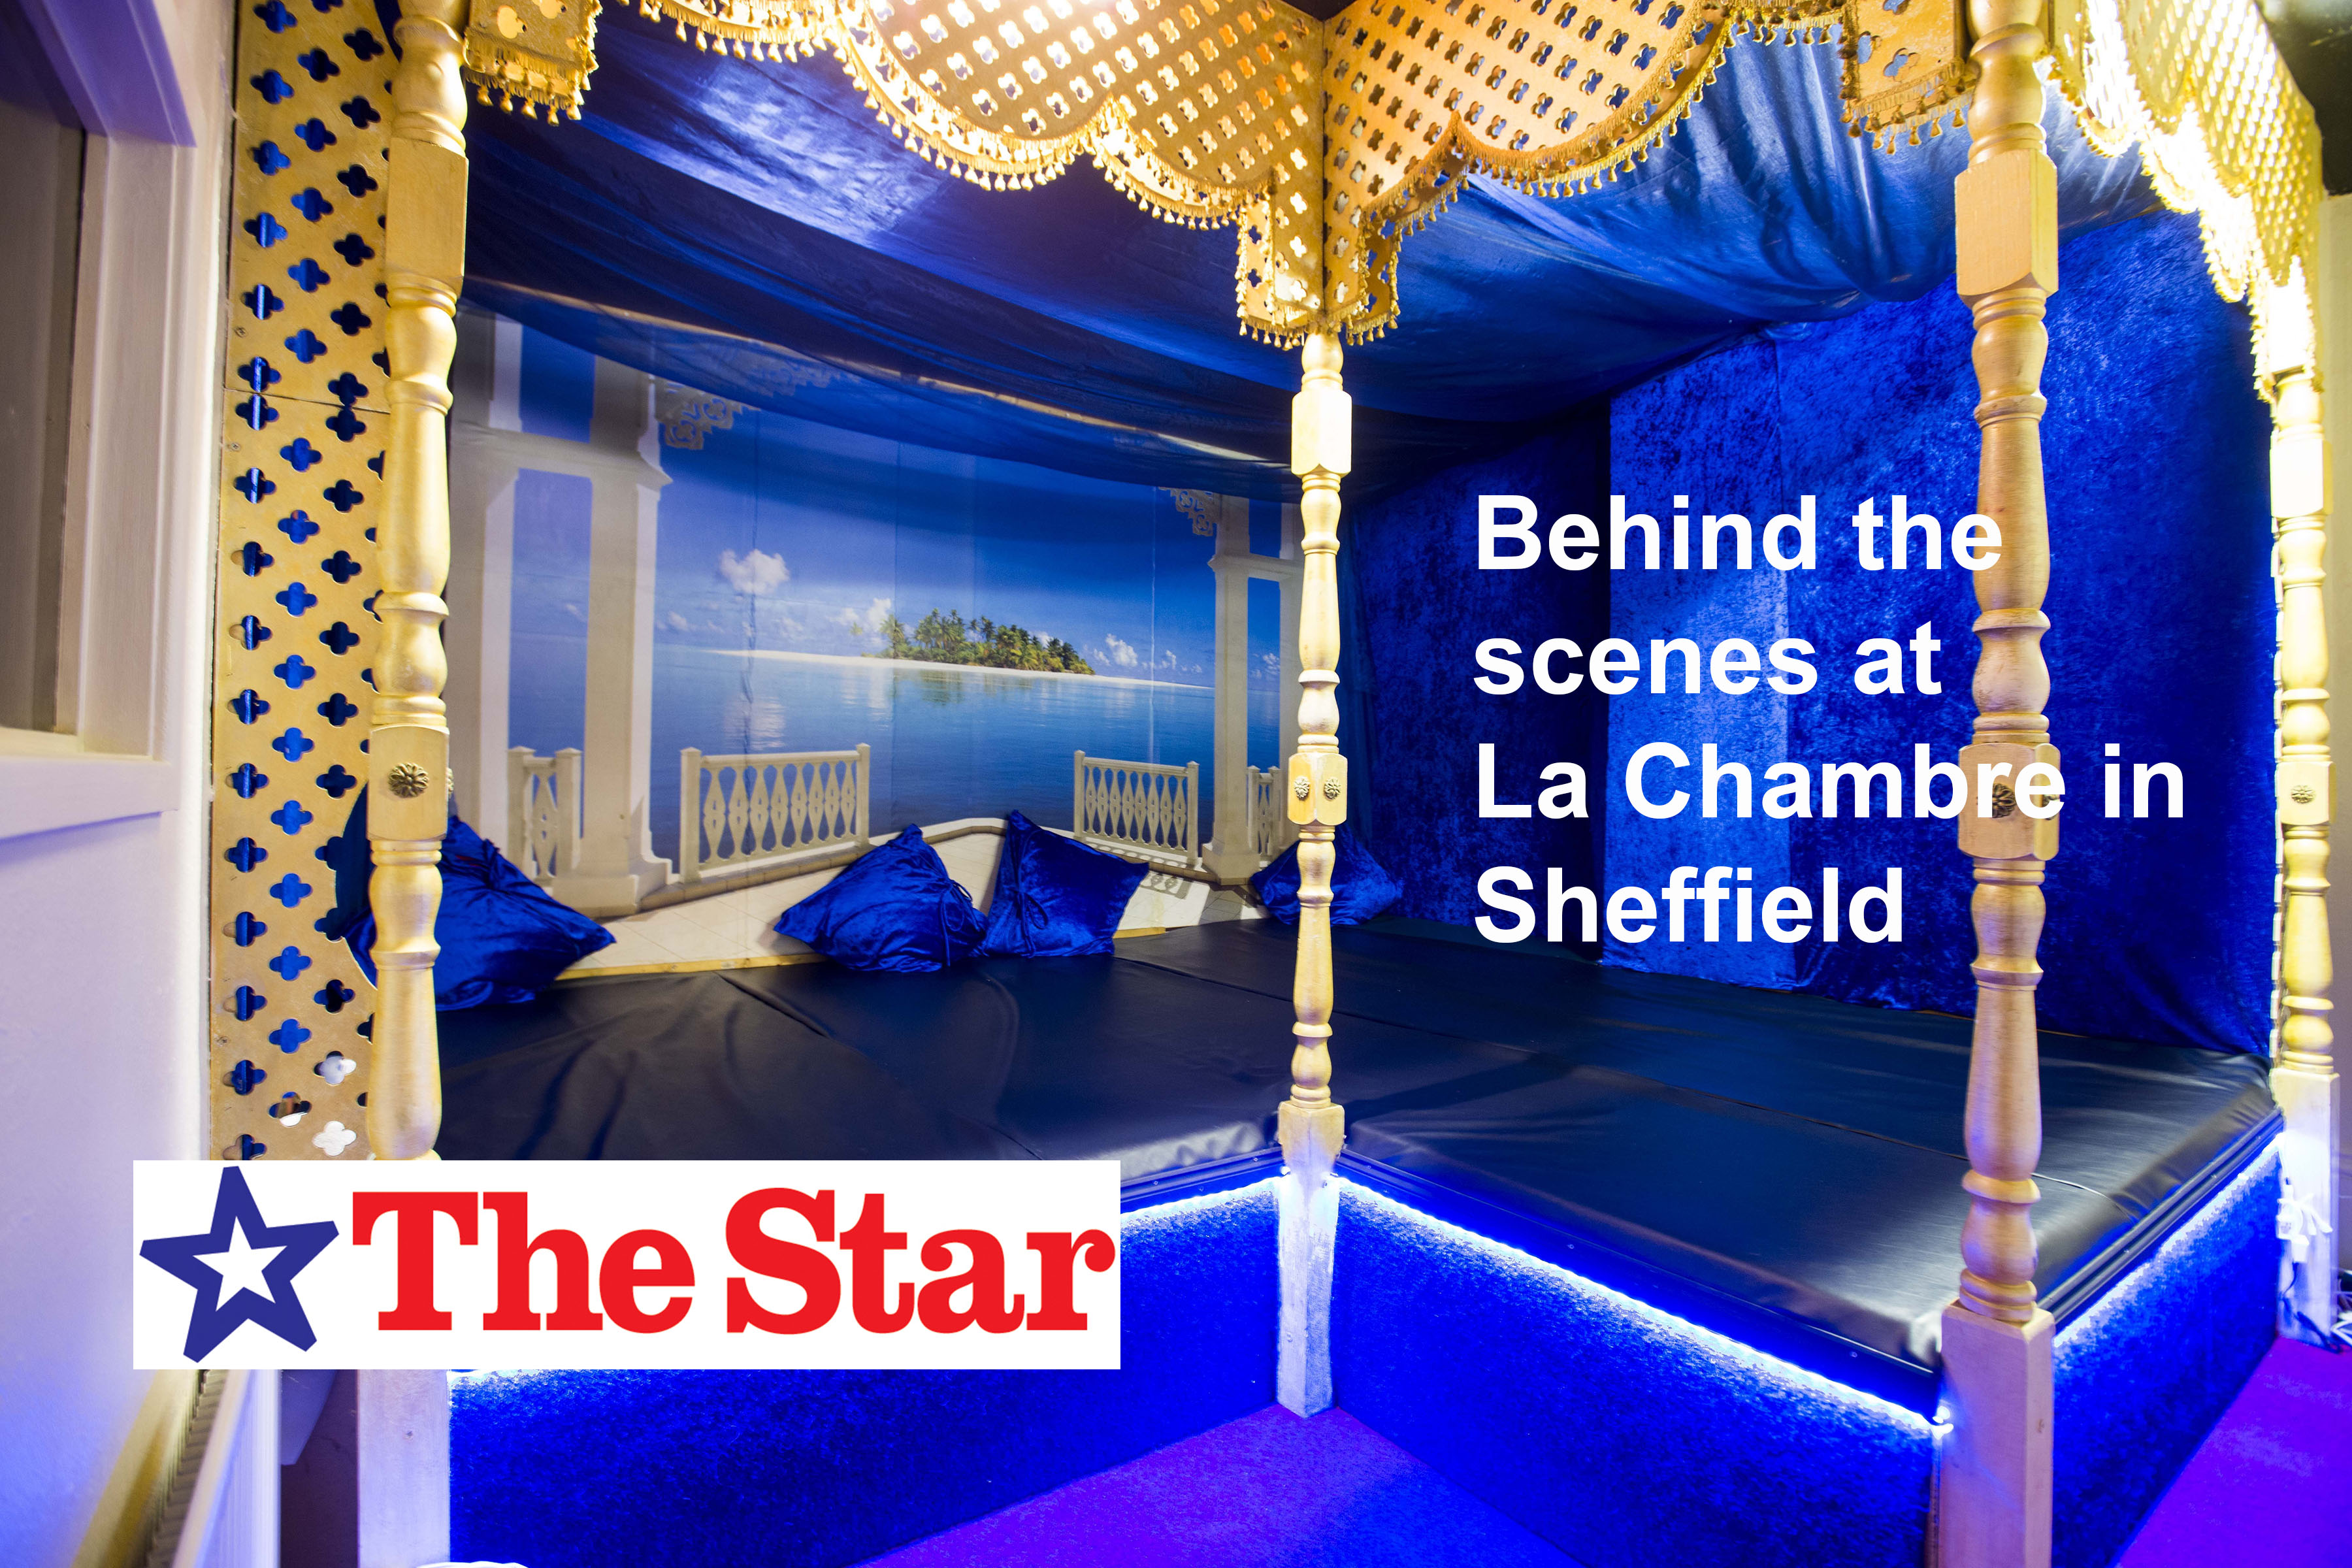 La Chambre Sheffield Hundreds of enquiries over re-opening of famous swingers sex club